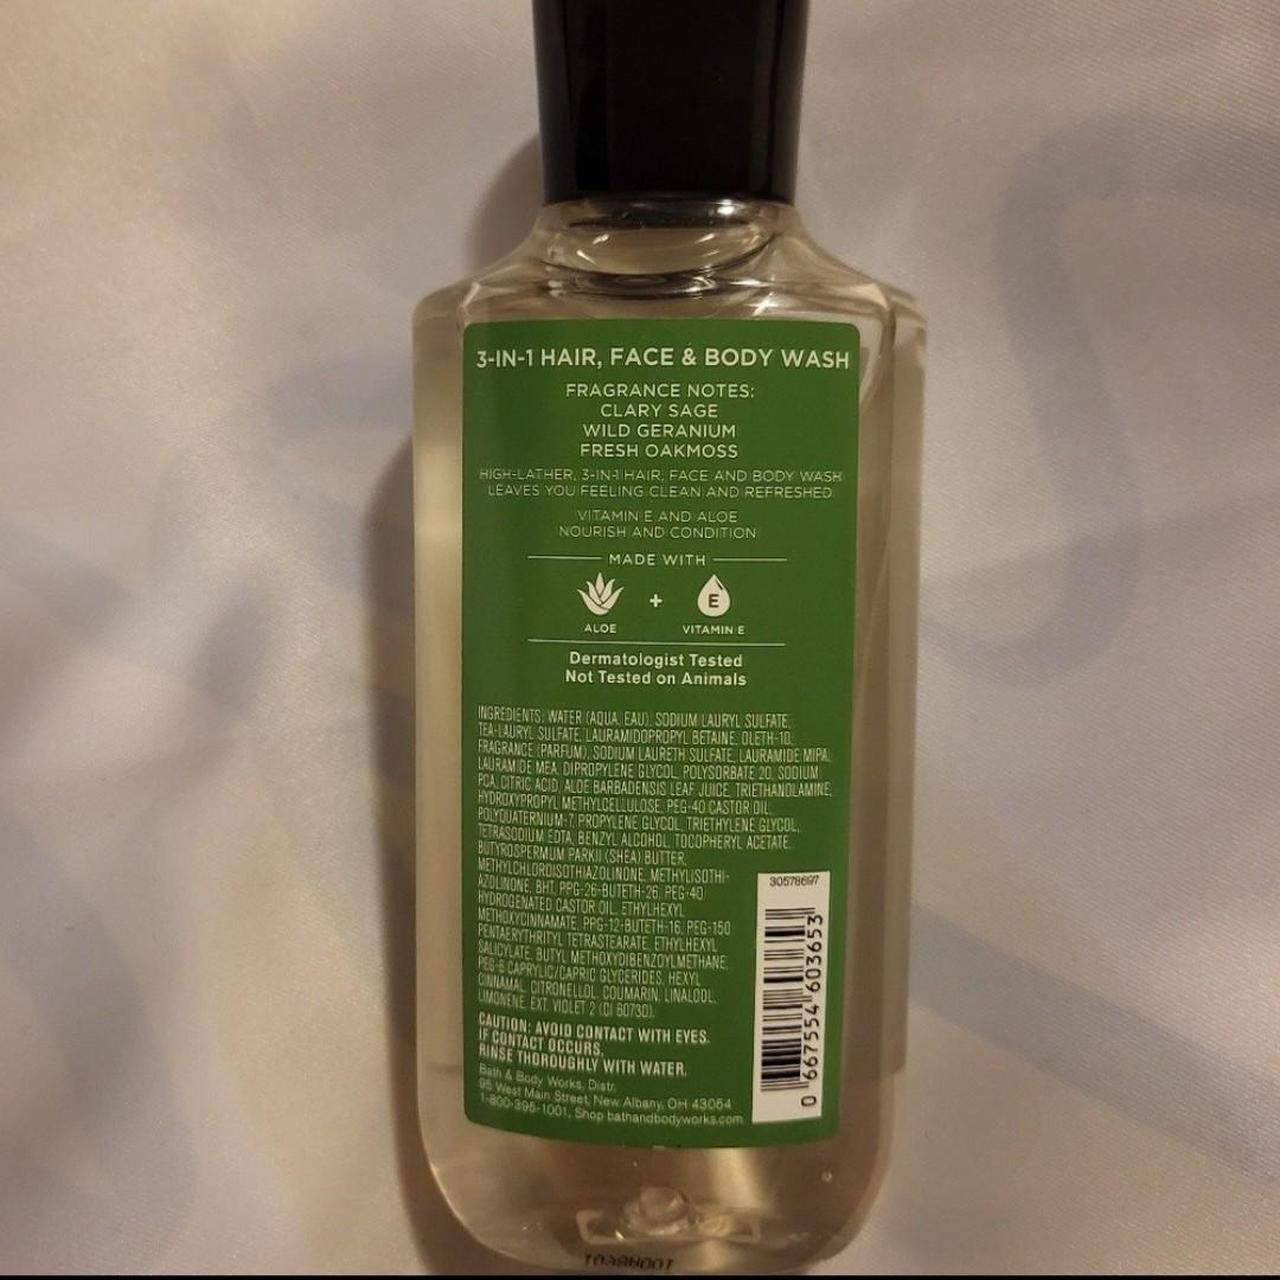 Product Image 2 - Champion men's collection Body wash.